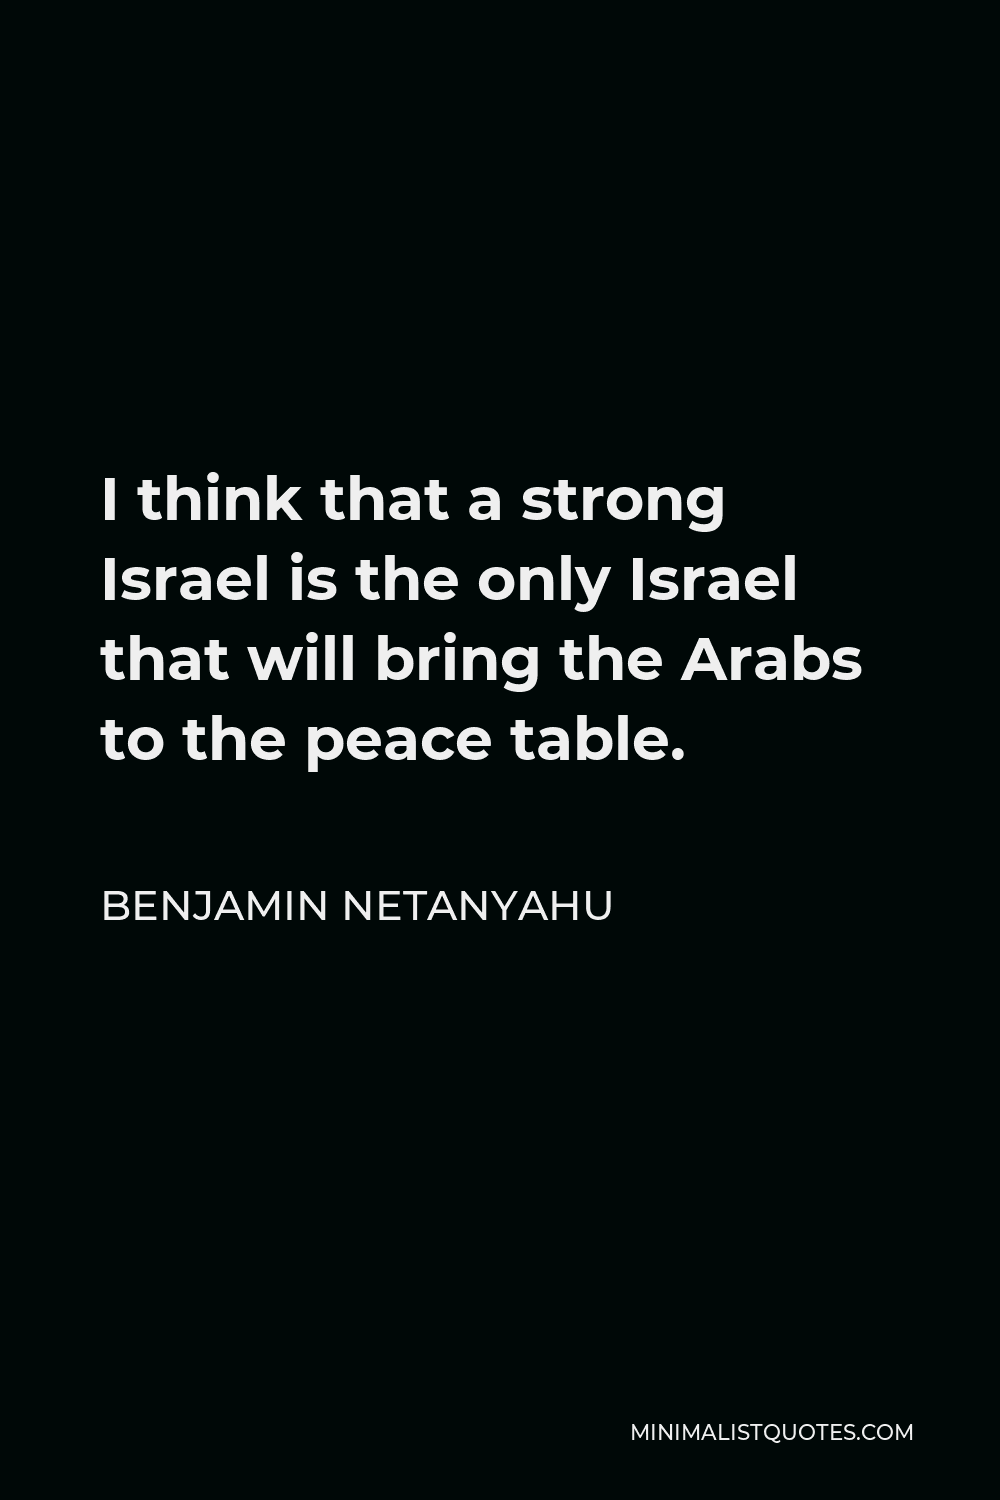 Benjamin Netanyahu Quote - I think that a strong Israel is the only Israel that will bring the Arabs to the peace table.